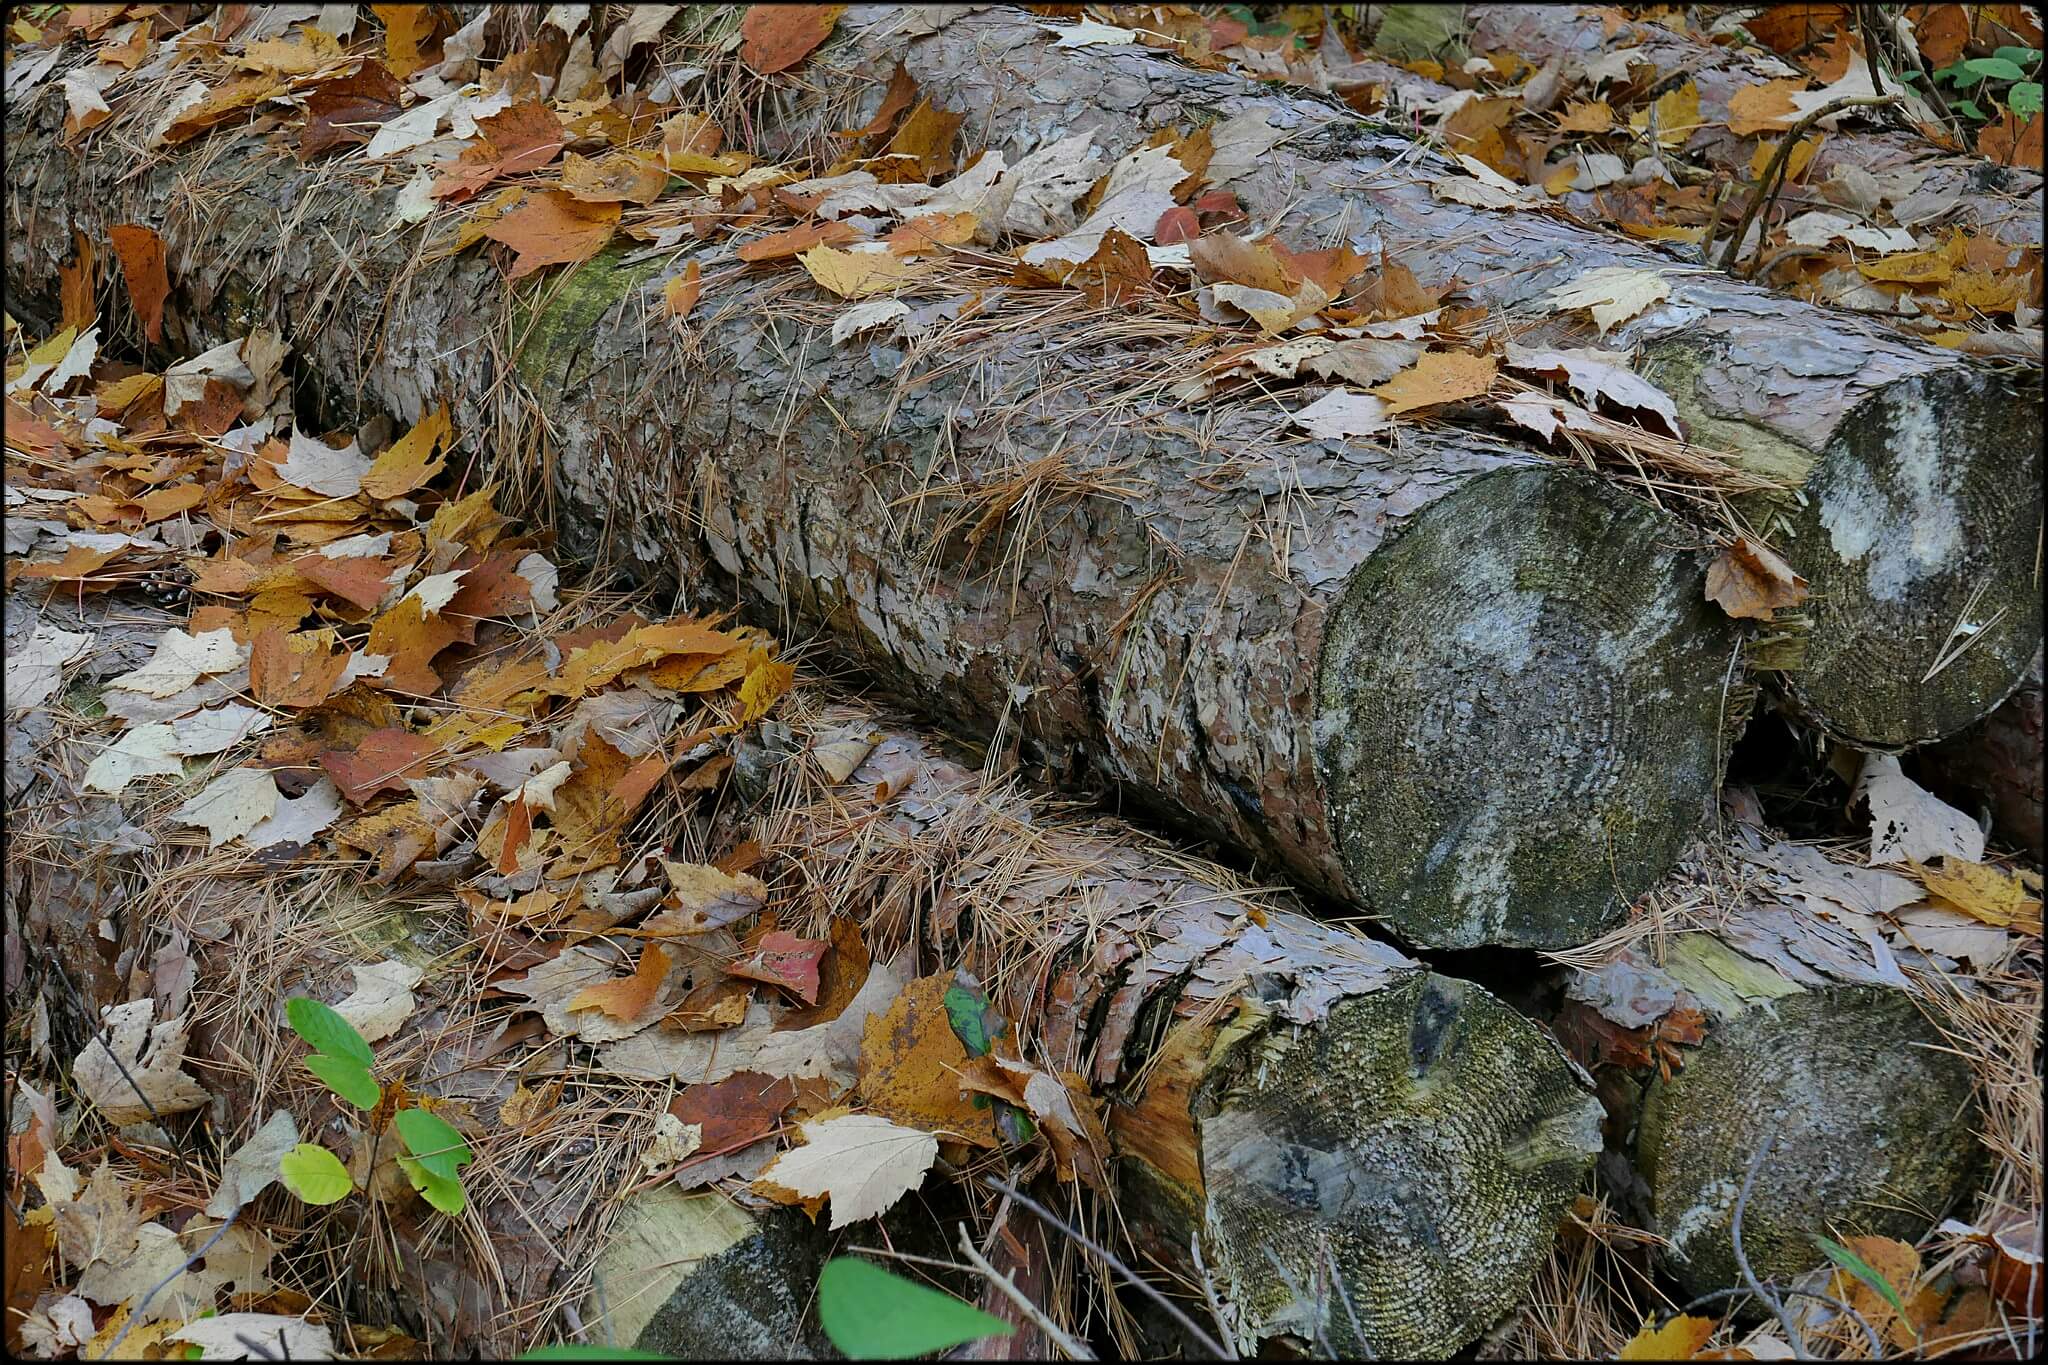 A pile of neatly stacked logs covered in autumn leaves